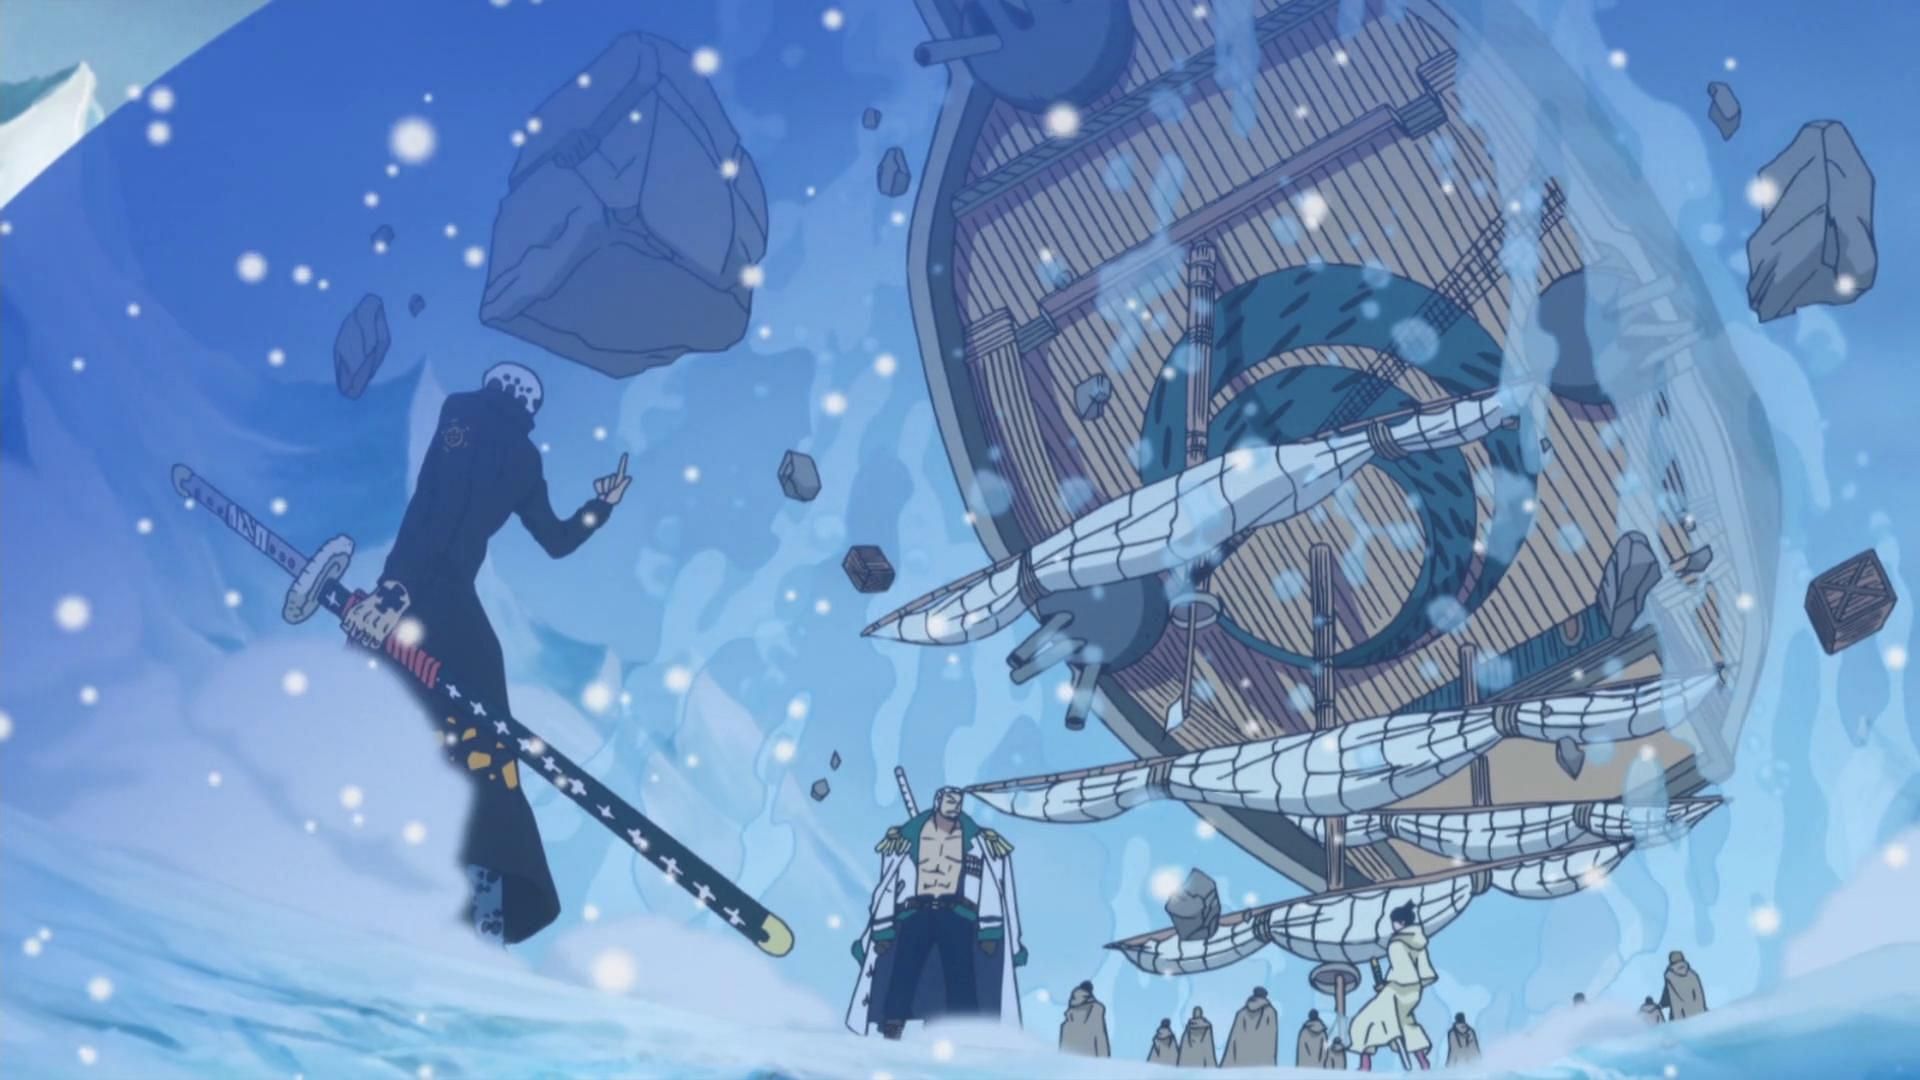 The Ope-Ope Fruit as seen in One Piece (Image via Toei Animation)